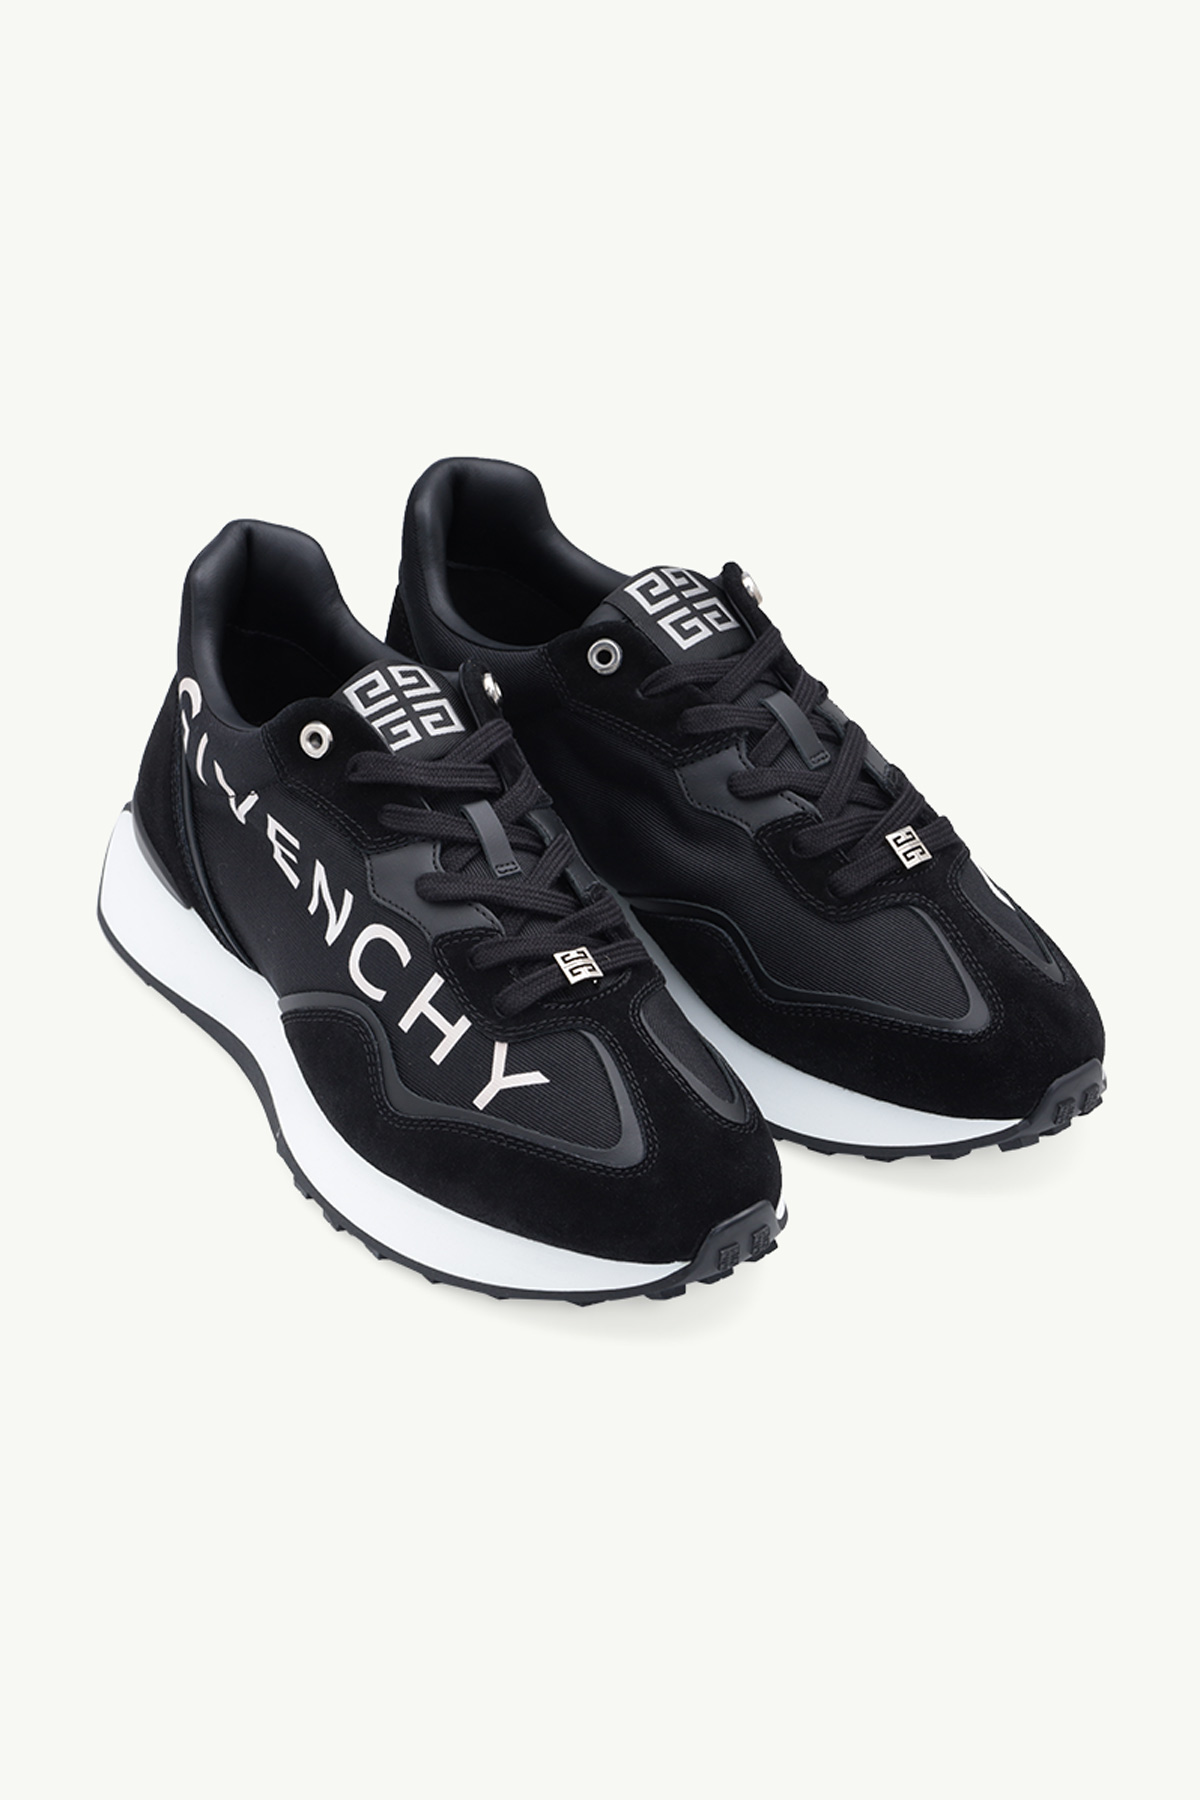 GIVENCHY Men GIV Runner Sneakers in Black/White Suede x Nylon 1